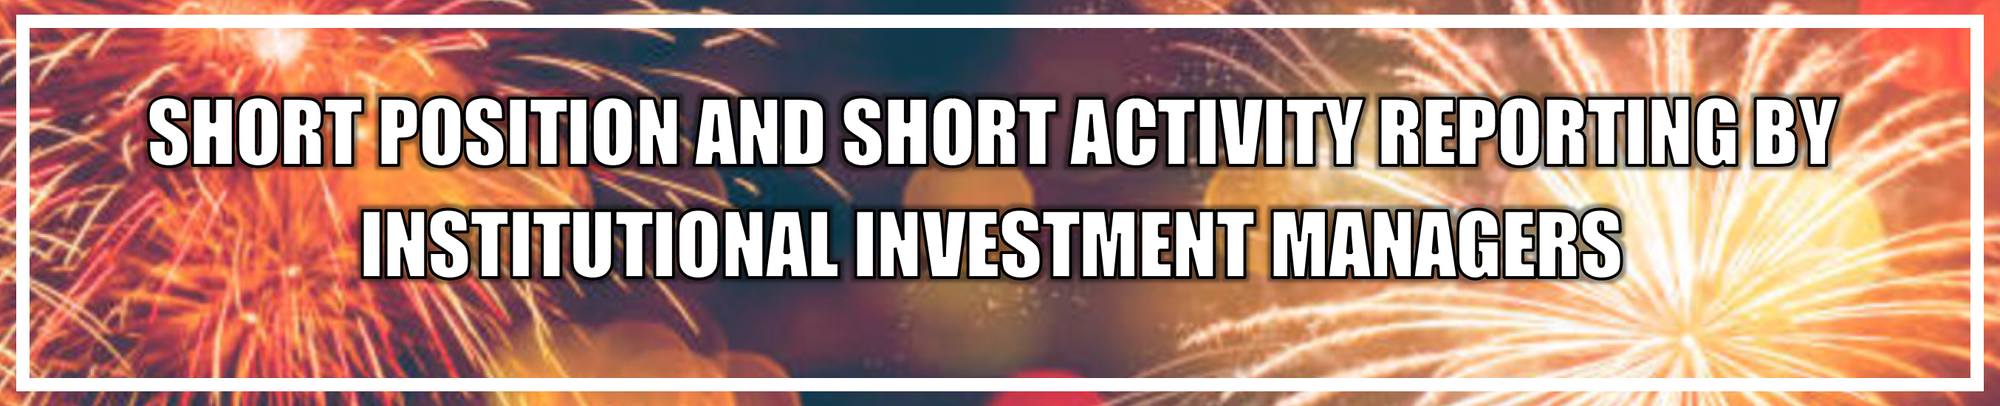 HEADER - SHORT POSITION AND SHORT ACTIVITY REPORTING BY INSTITUTIONAL INVESTMENT MANAGERS